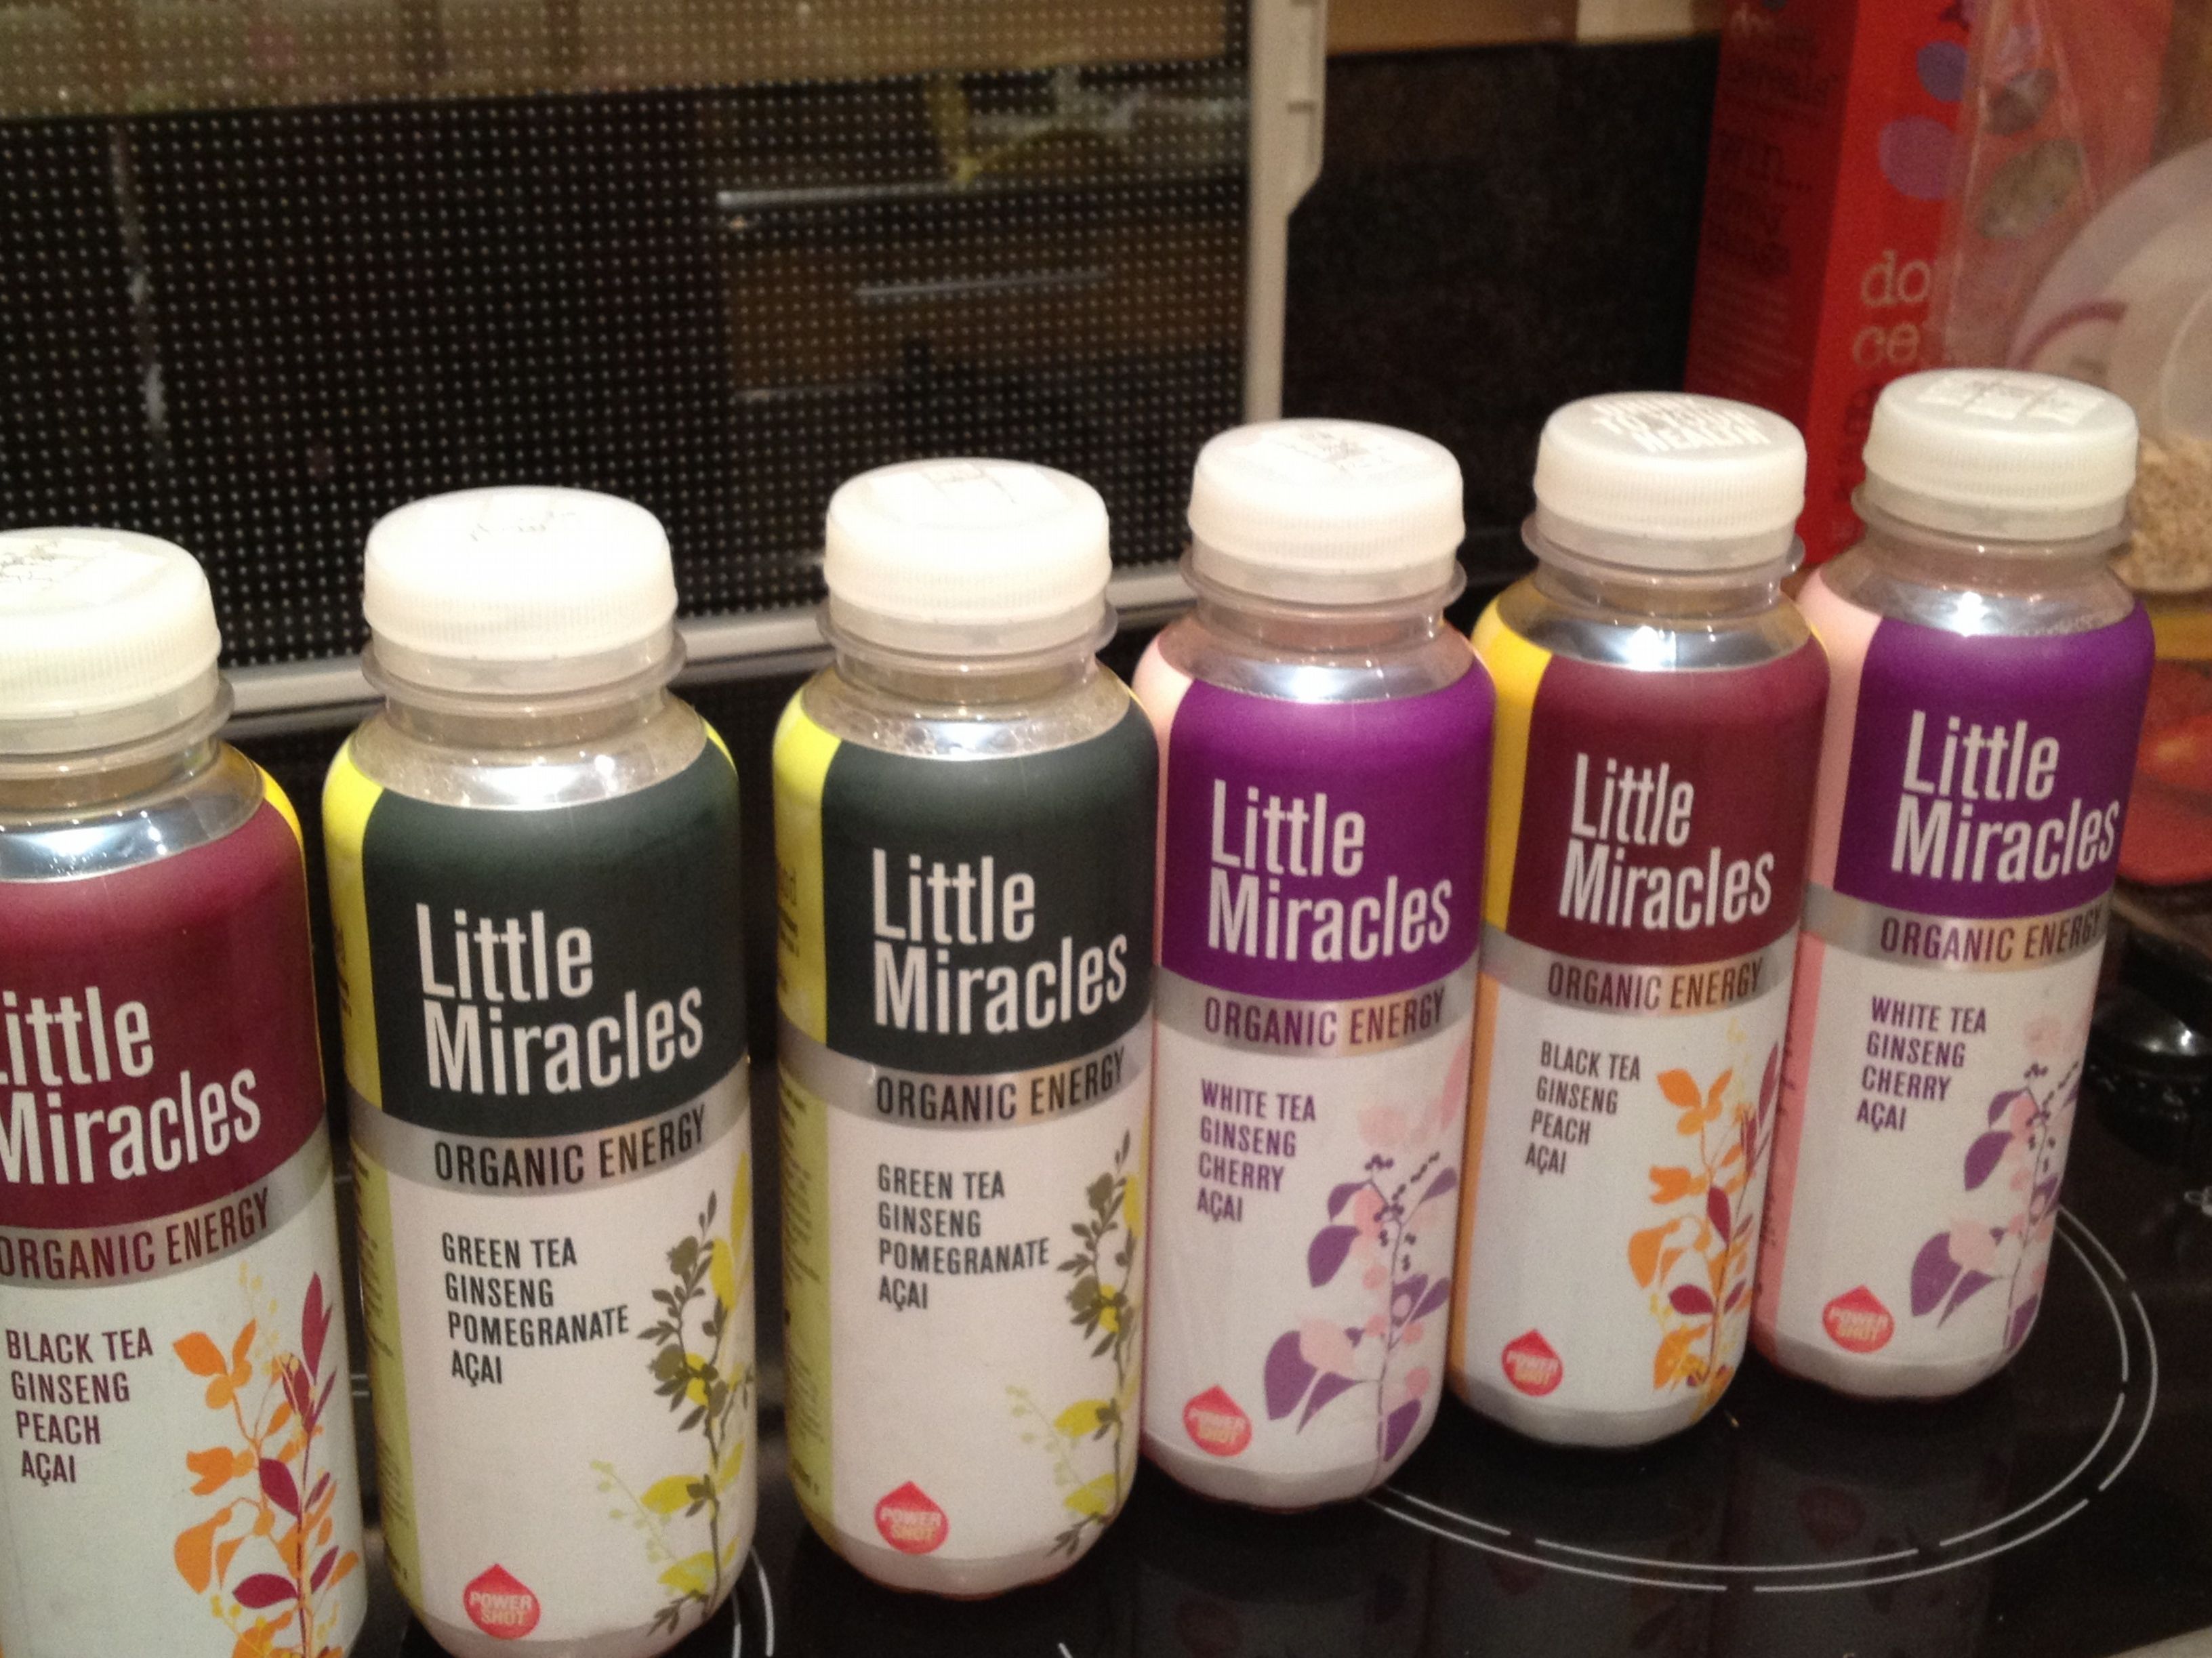 Little Miracles.